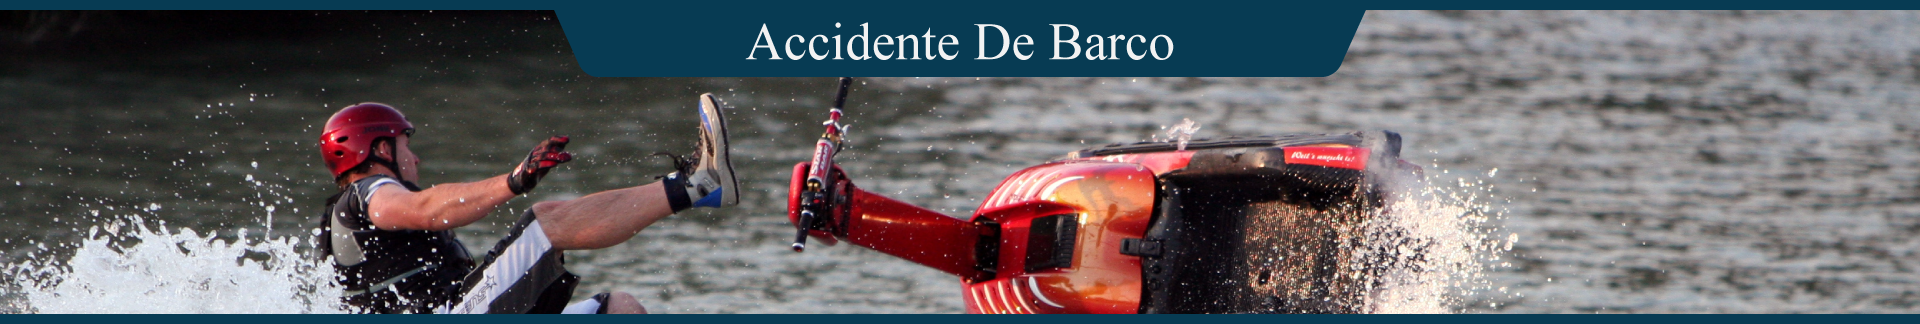 Boating Jet Ski Accident The Peña Law Firm